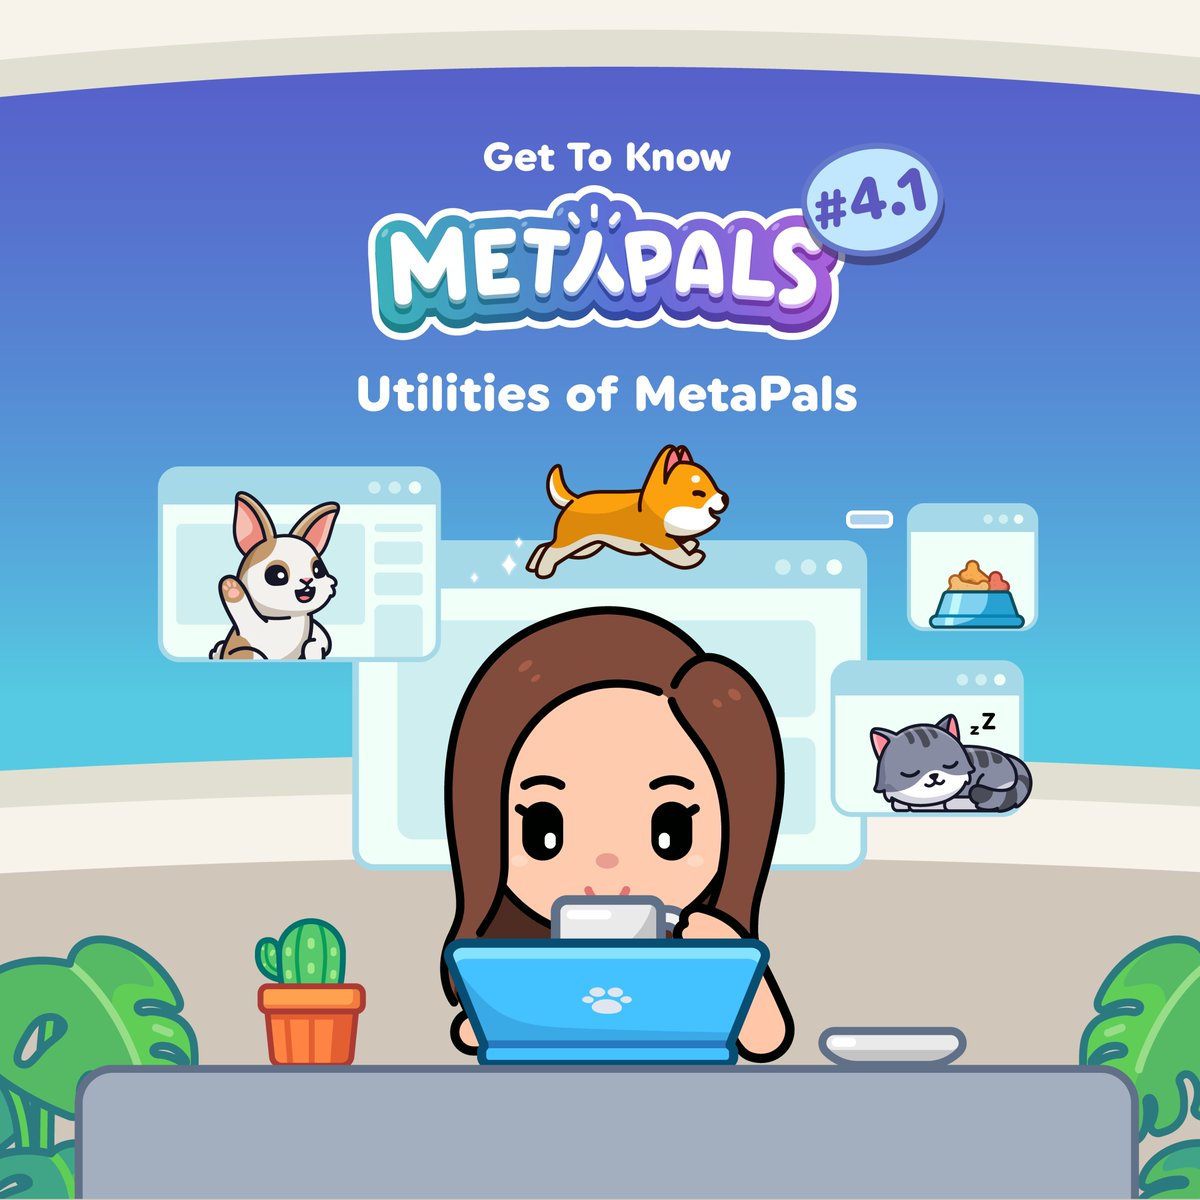 MetaPals is not just your basic digital companions, it's far beyond that🚀 Take a look at what MetaPals has to offer!👀